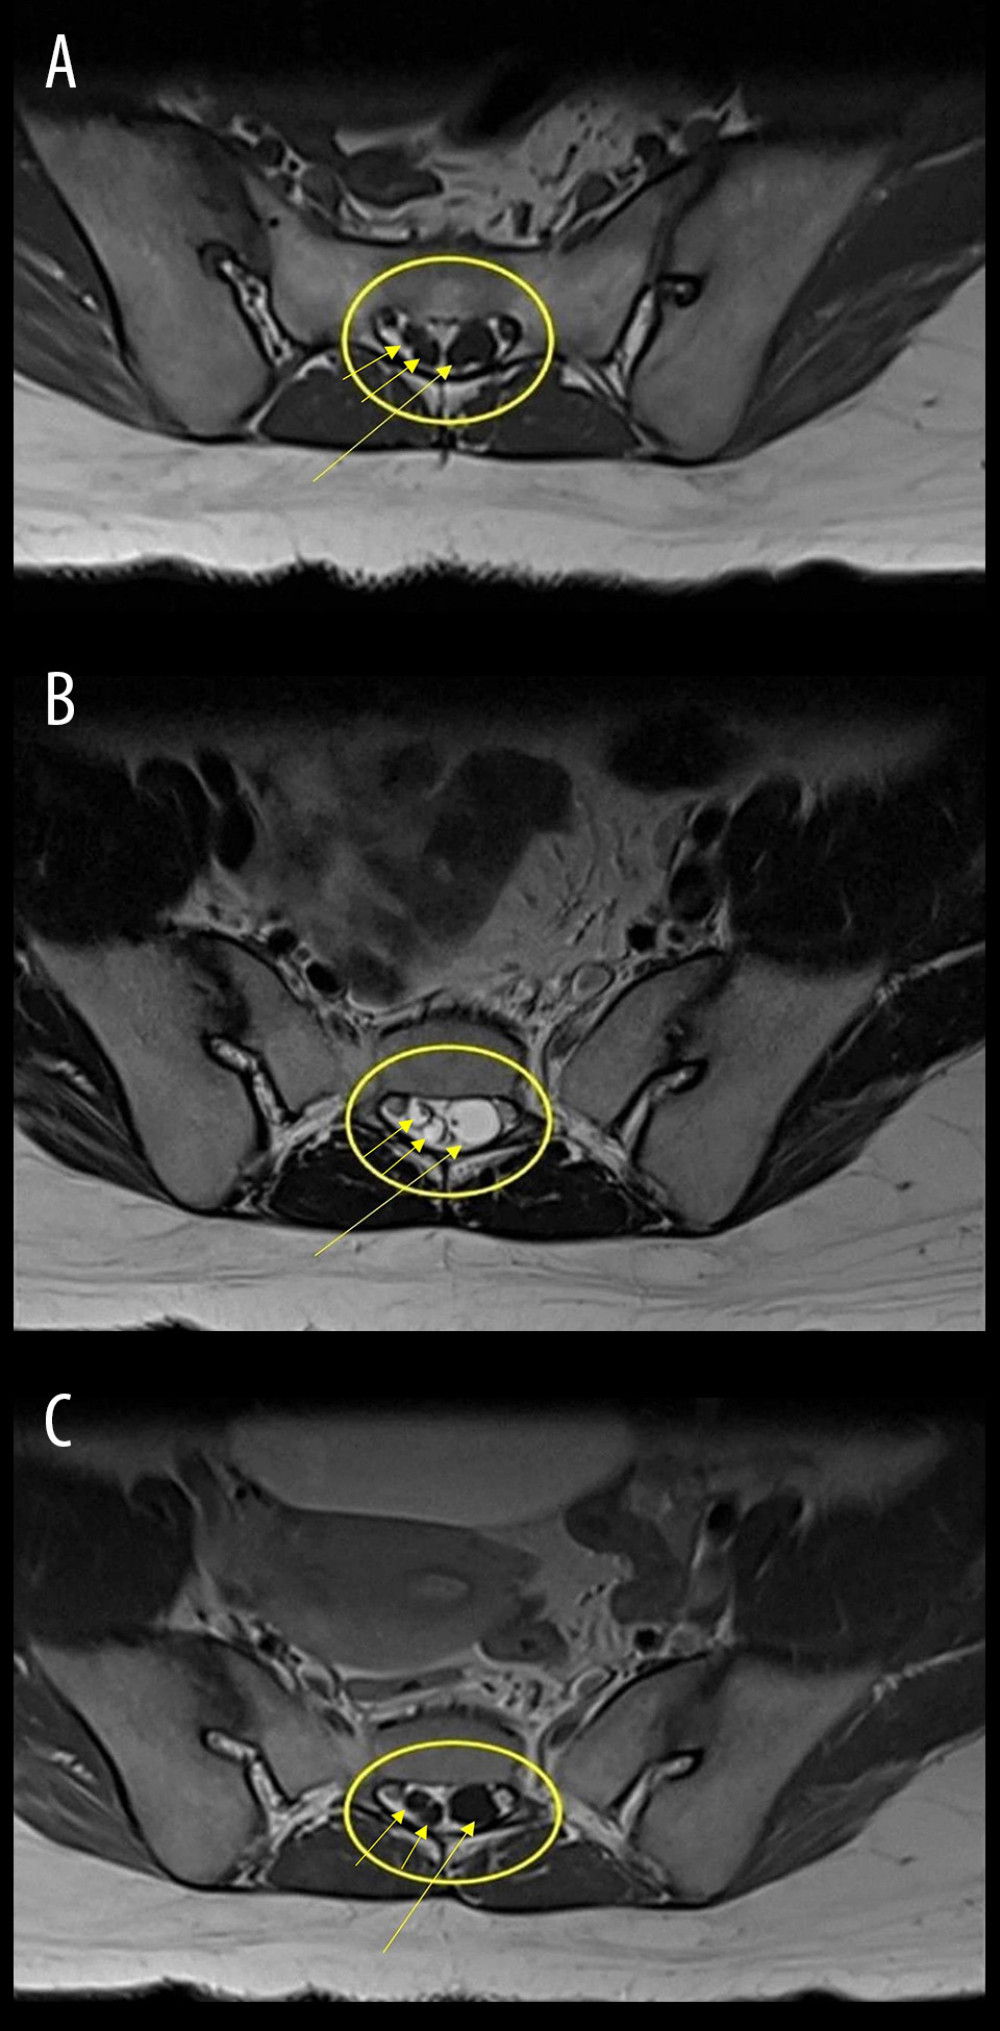 (A) Axial T1-weighted image at the S2 level, showing several perineural lesions (in yellow circle with arrows) in the spinal canal at the S2 vertebral level. These lesions demonstrate low signal on T1-weighted image. (B) Axial T2-weighted image at the S2 level showing hyperintense lesions (in yellow circle with arrows). (C) Axial post-gadolinium administration at the S2 level showing unenhanced lesions (in yellow circle with arrows) after the administration of gadolinium.